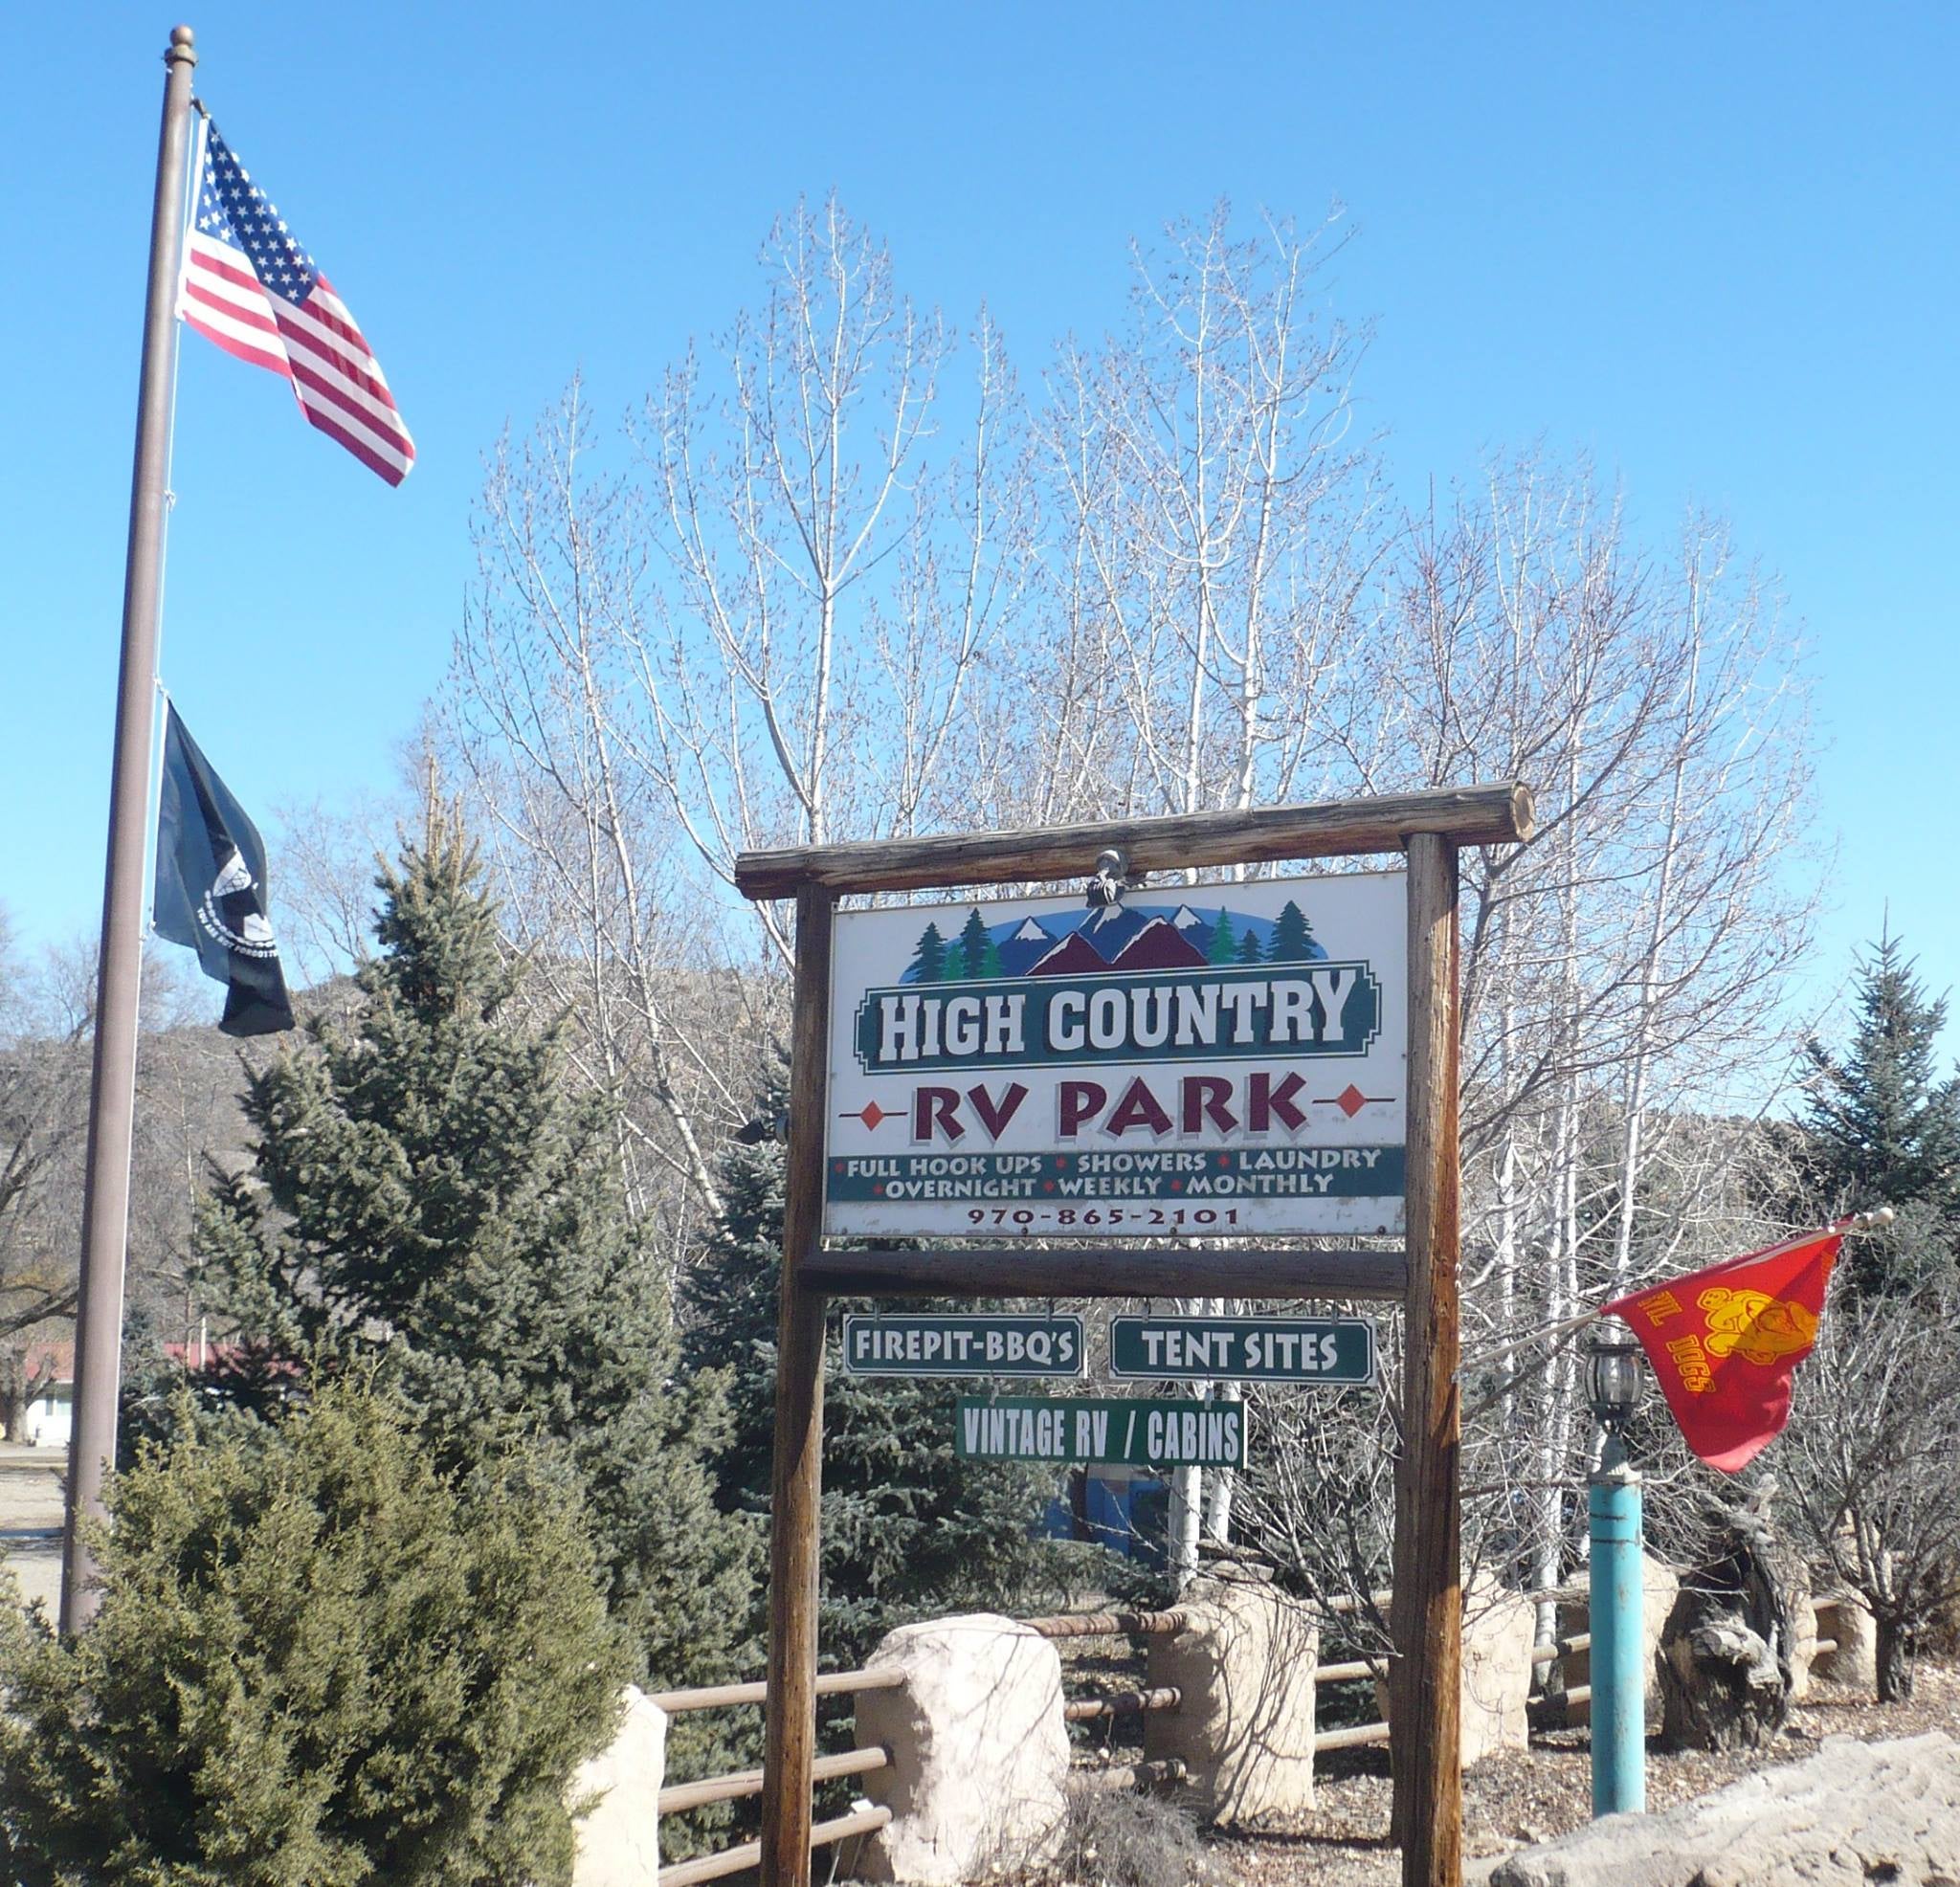 Camper submitted image from High Country RV Park - 3